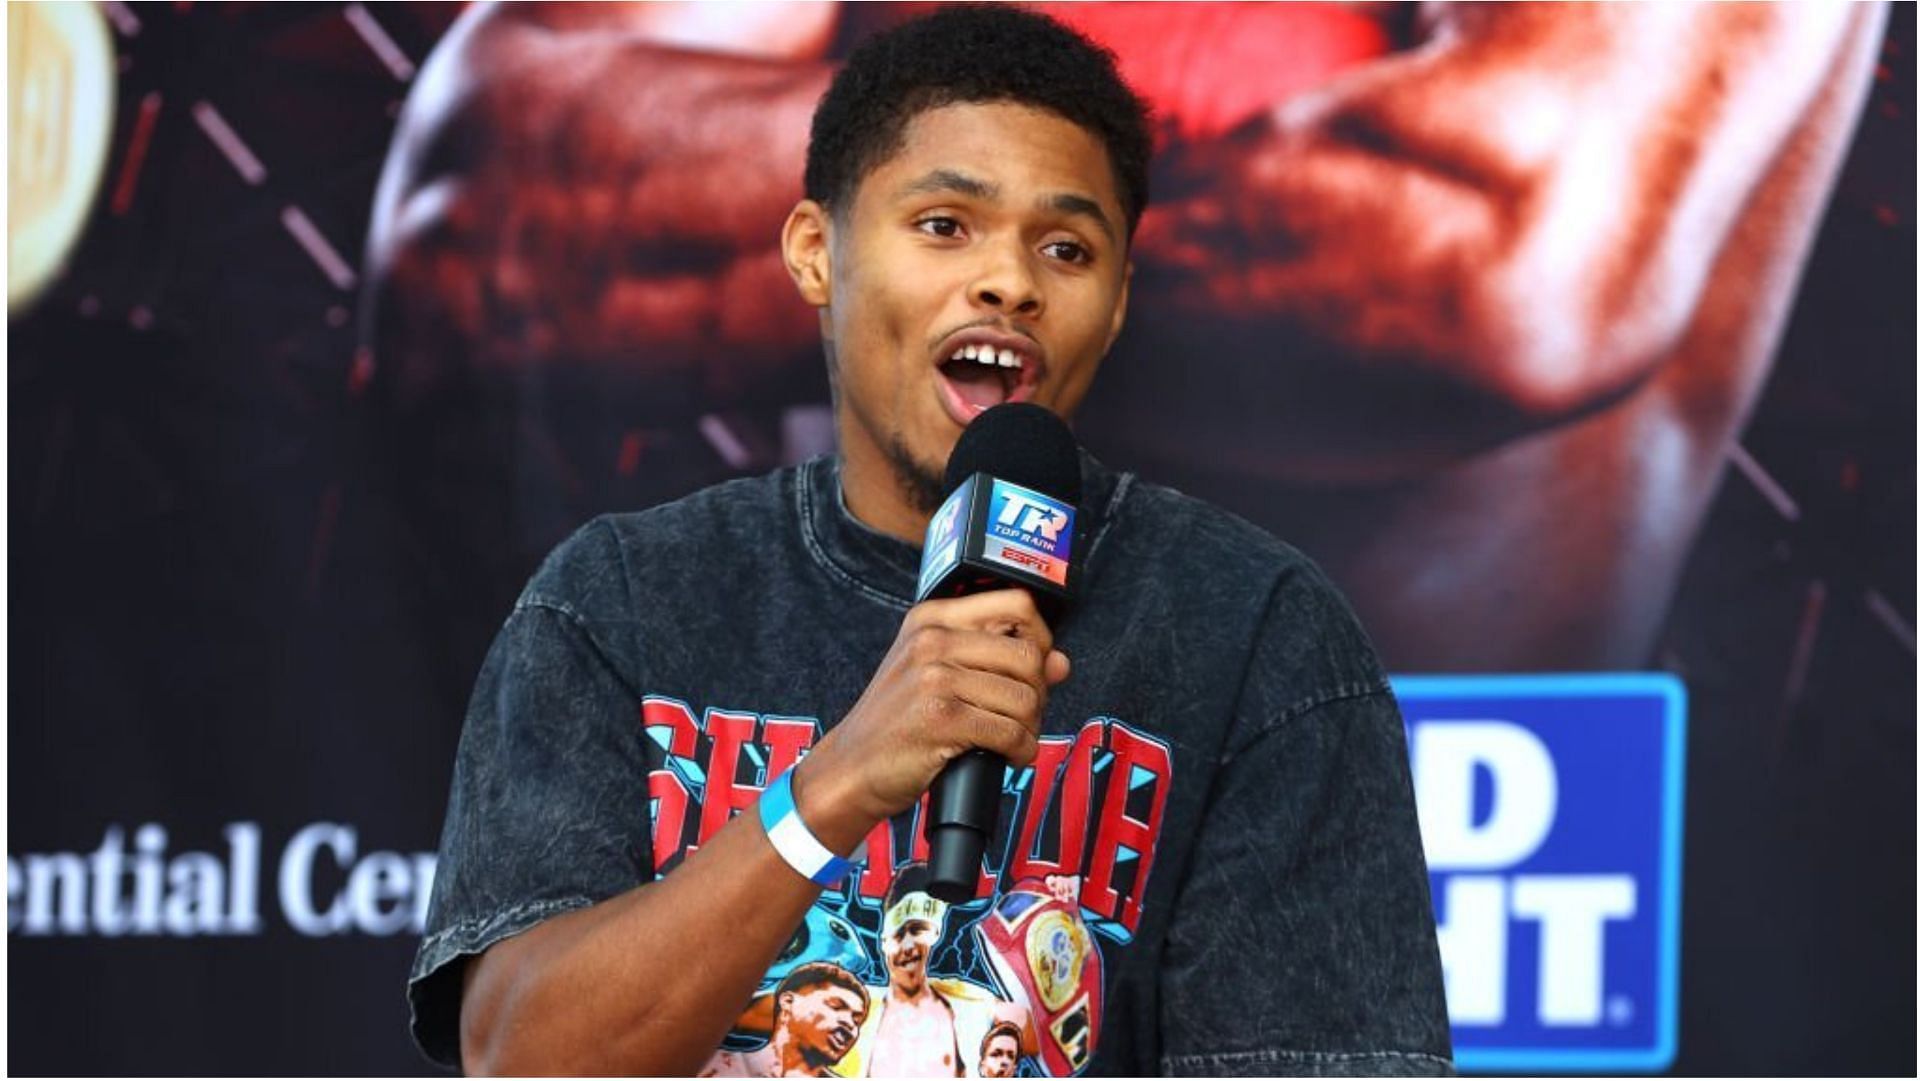 Shakur Stevenson is a professional boxer and has won several titles (Image via Mikey Williams/Getty Images)